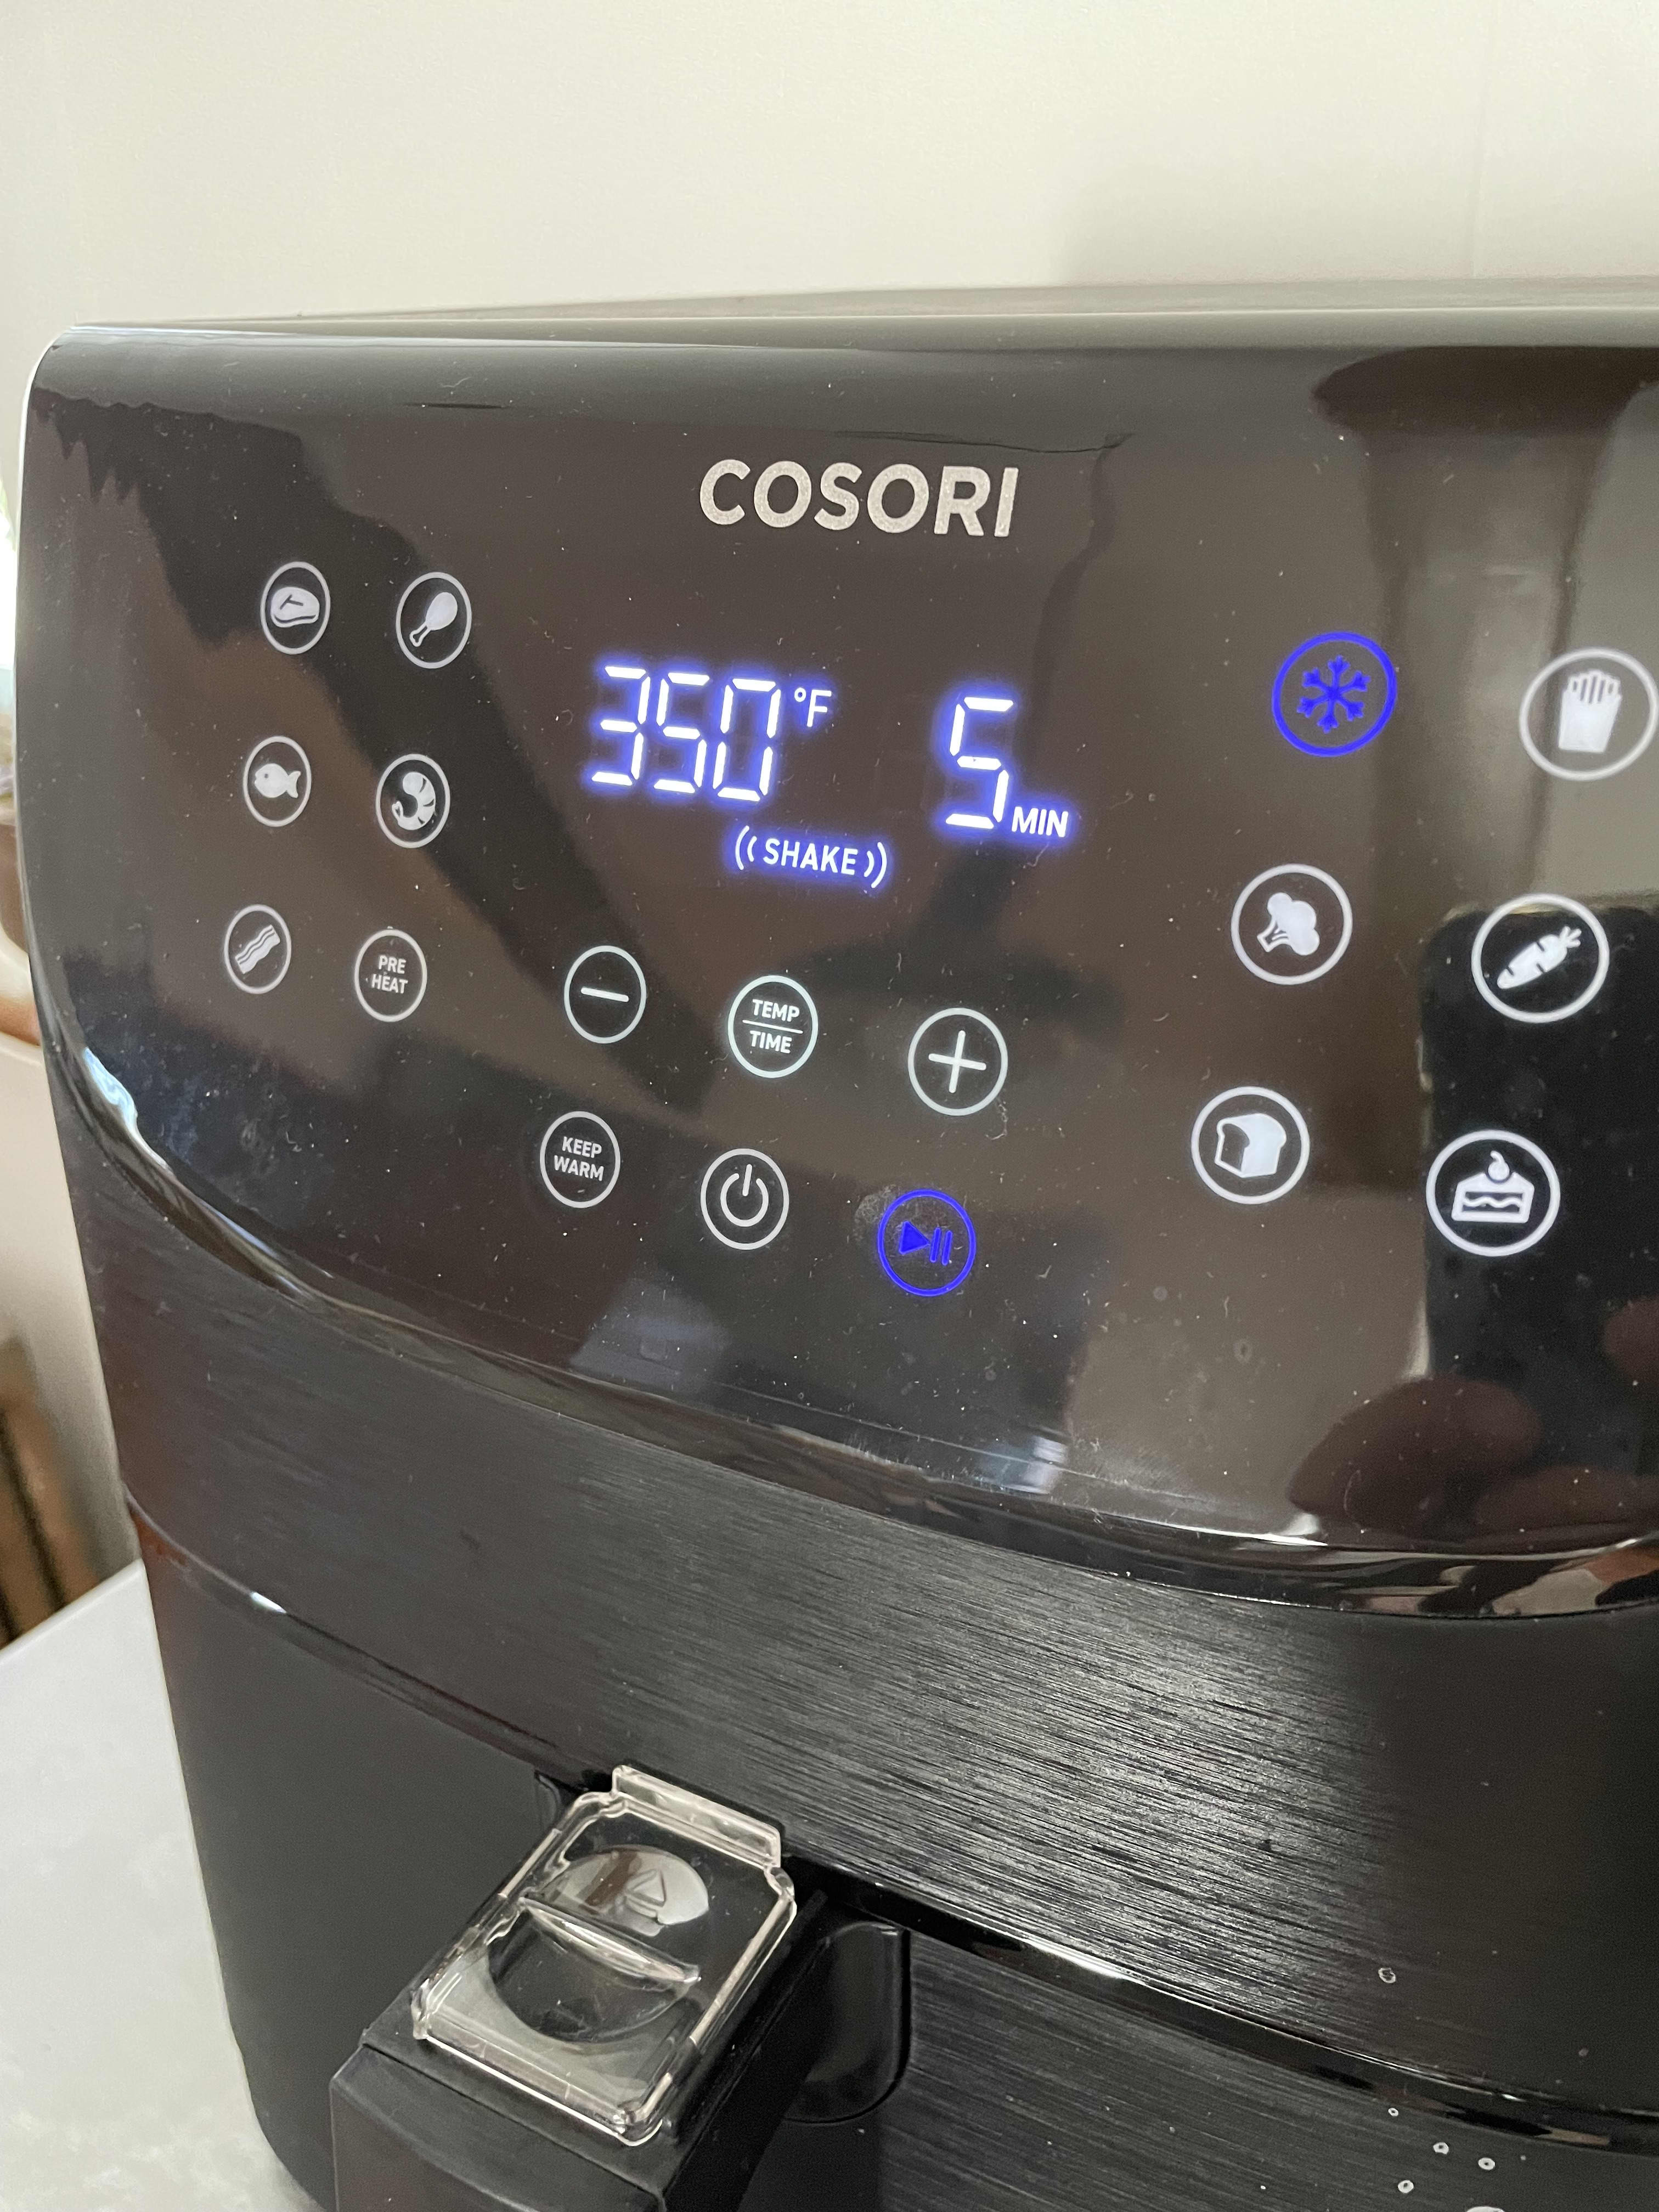 Cosori Air Fryer Review - My Experience